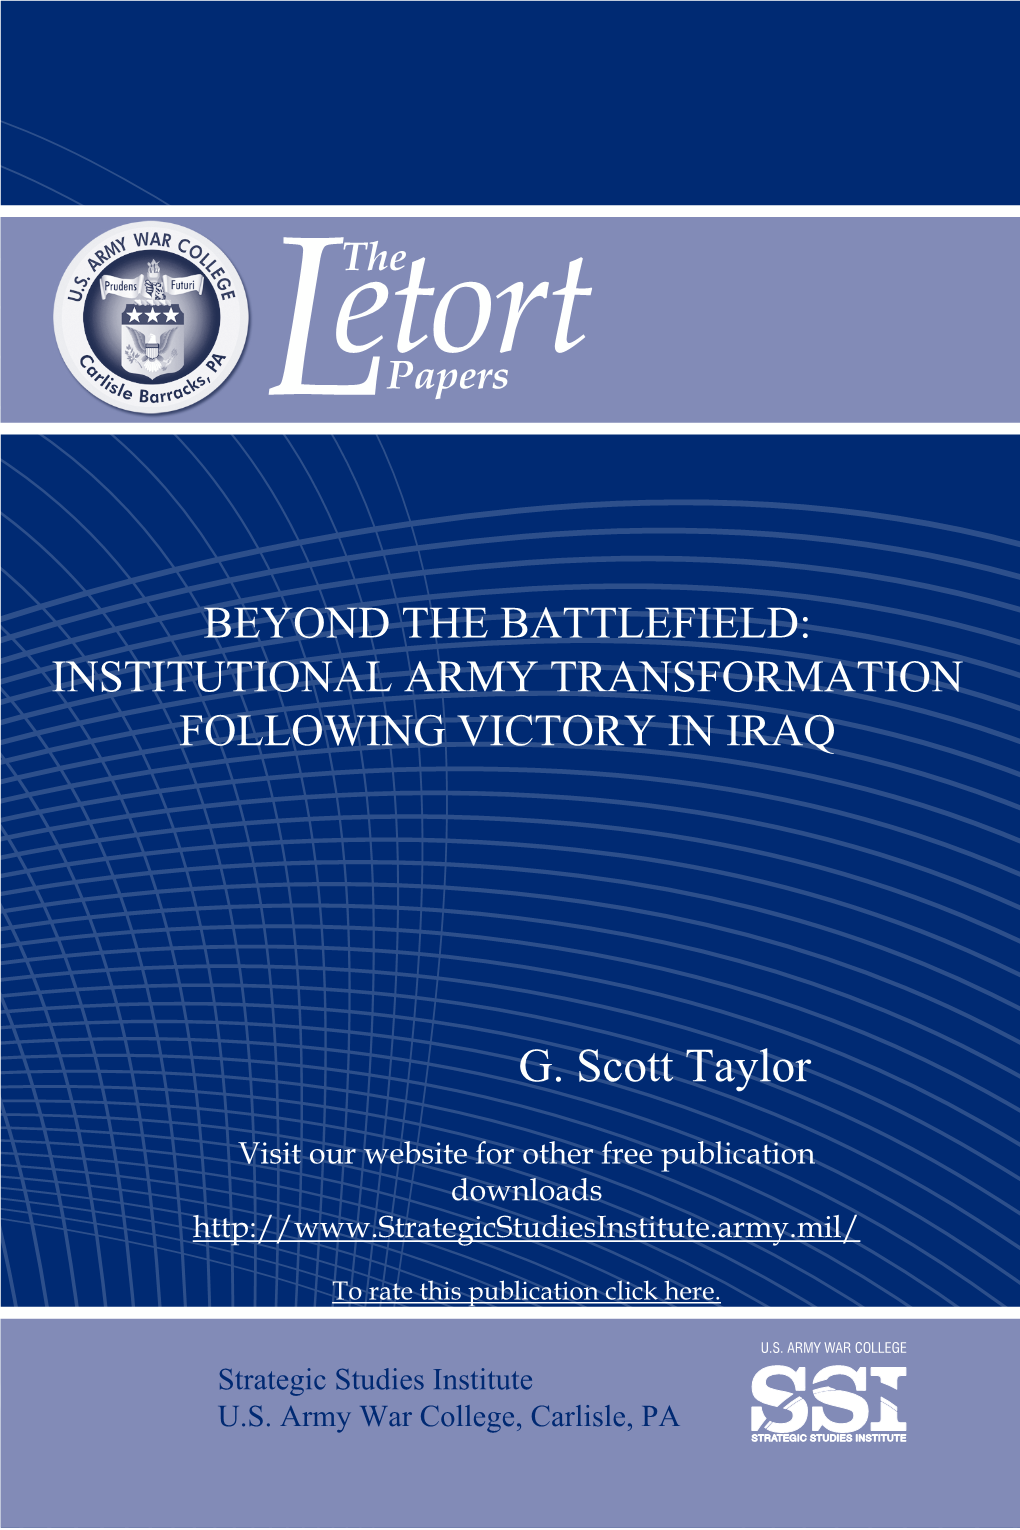 Beyond the Battlefield: Institutional Army Transformation Following Victory in Iraq U.S